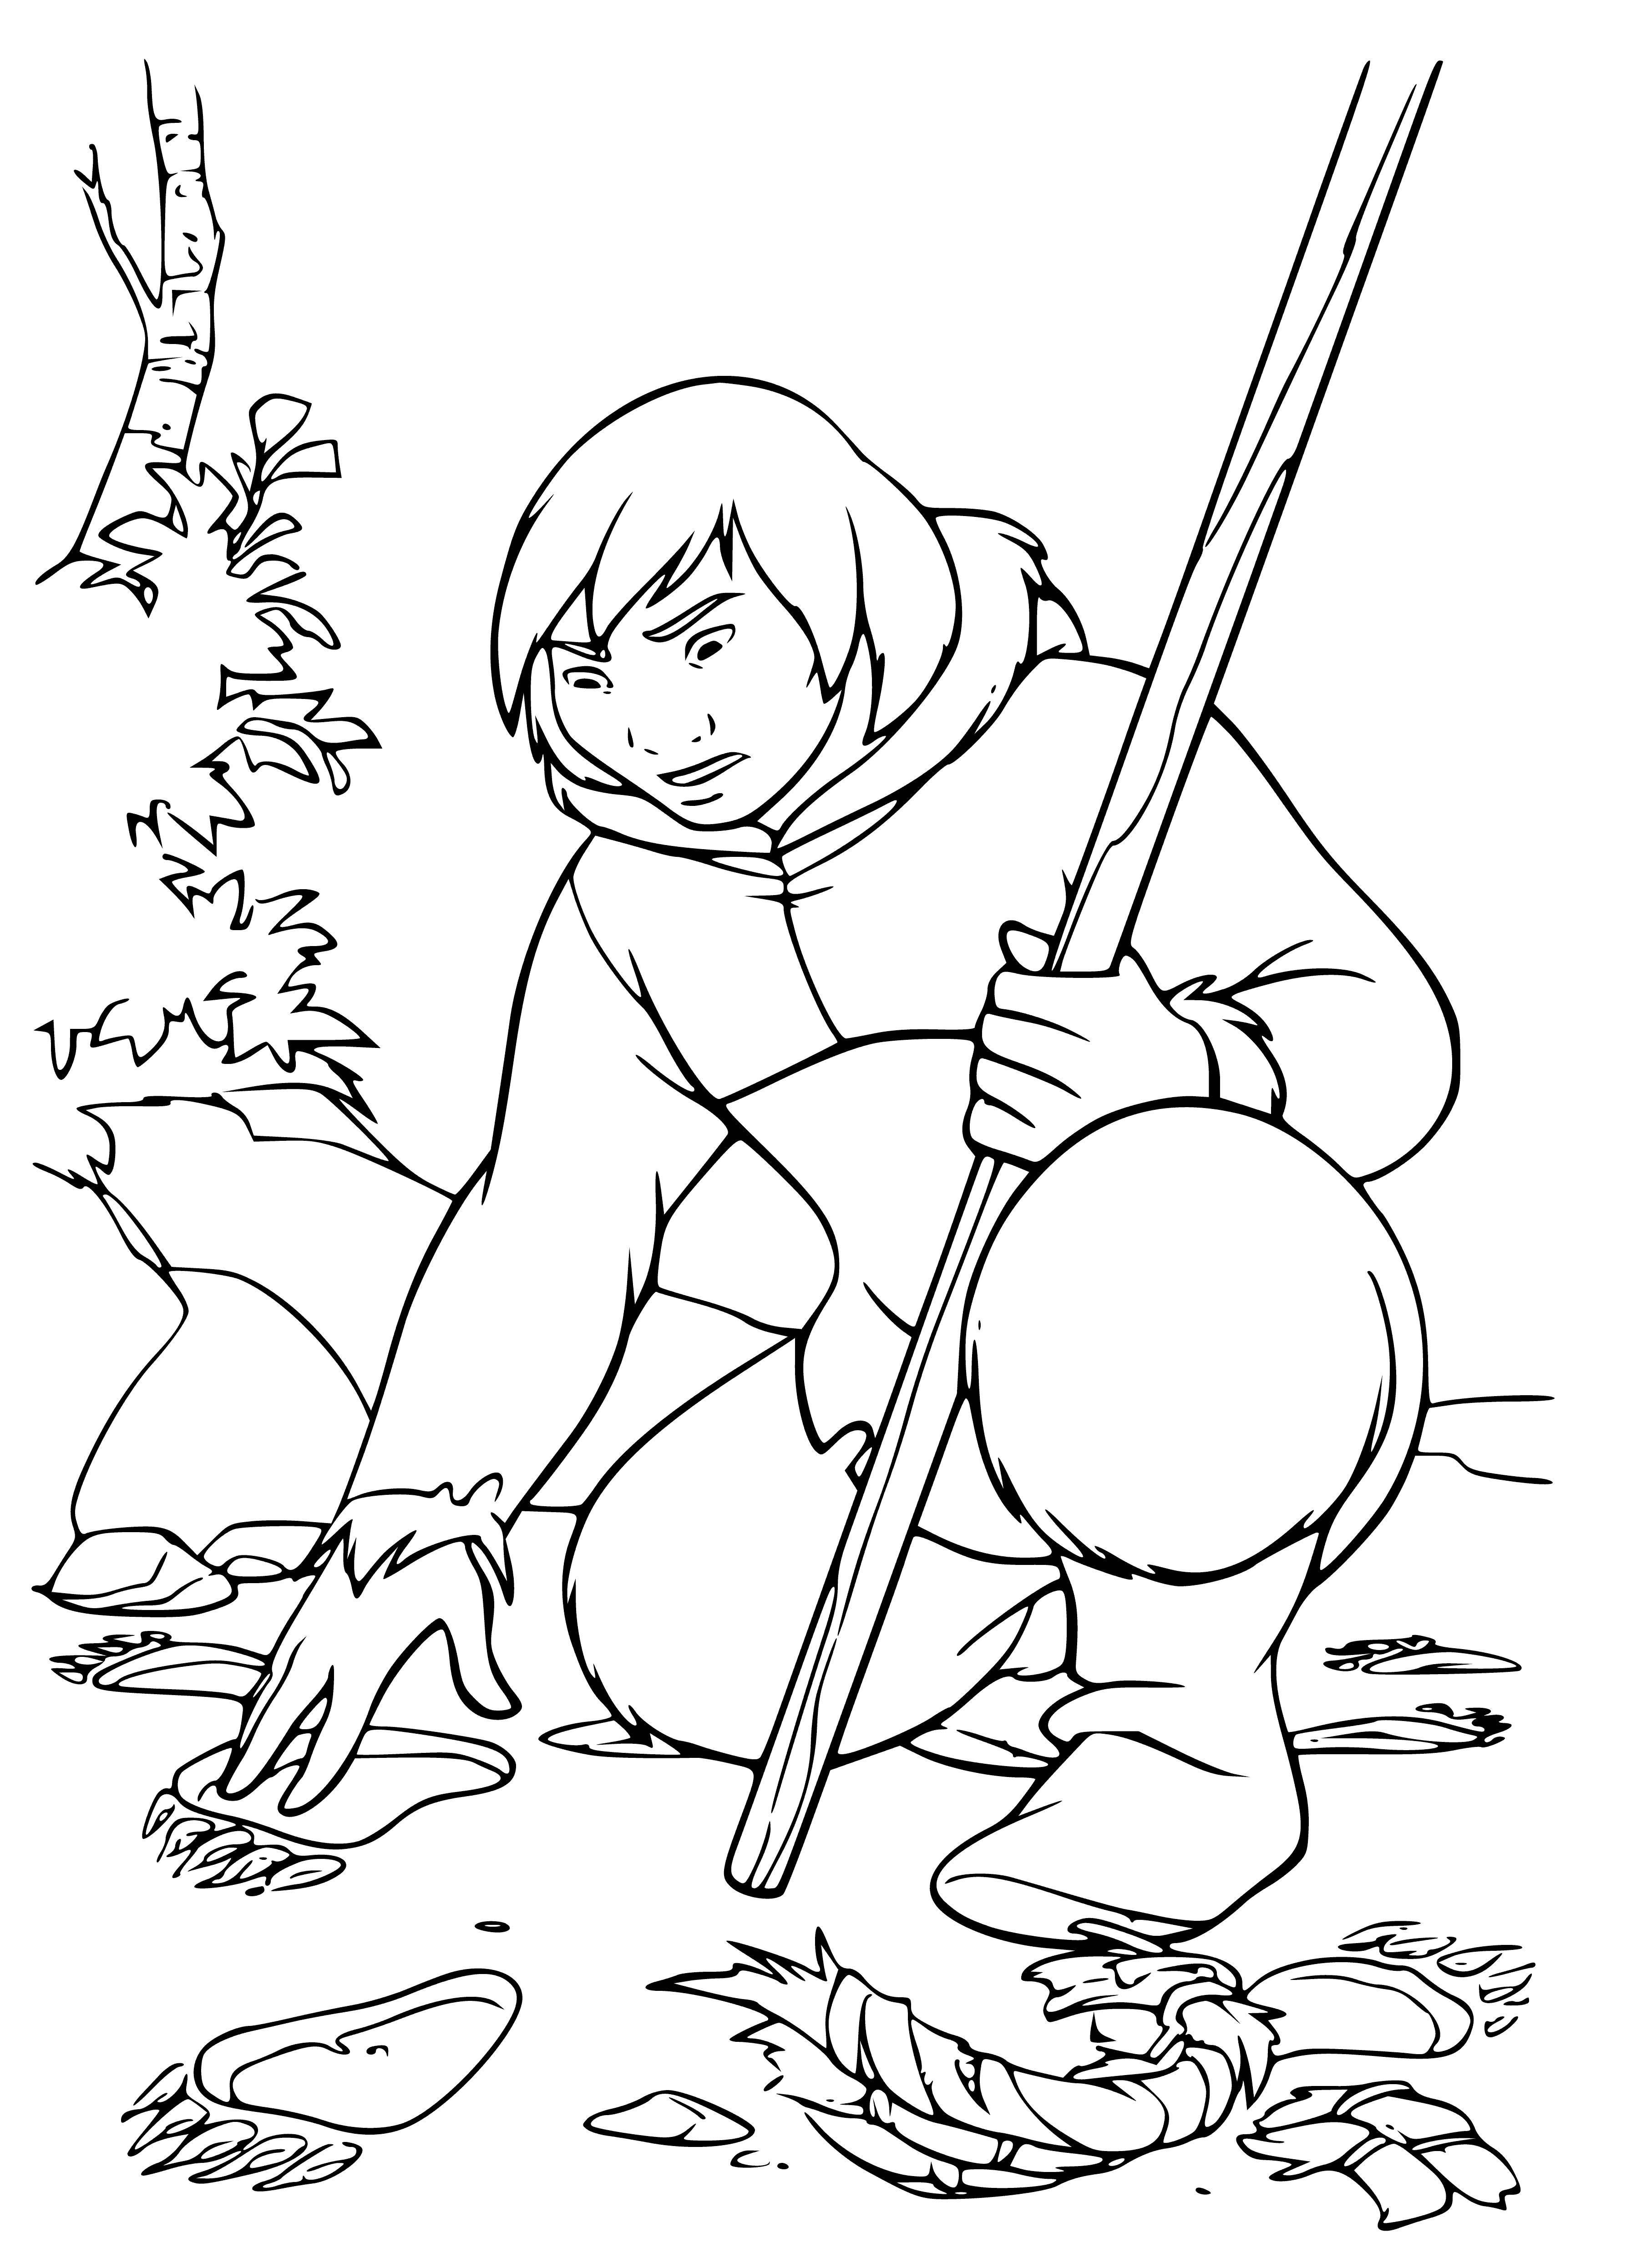 coloring page: Two Native American kids play in snow, laughing & happy. Boy wears blue coat, girl white dress. Both are barefoot. #Family #WinterPlaytime